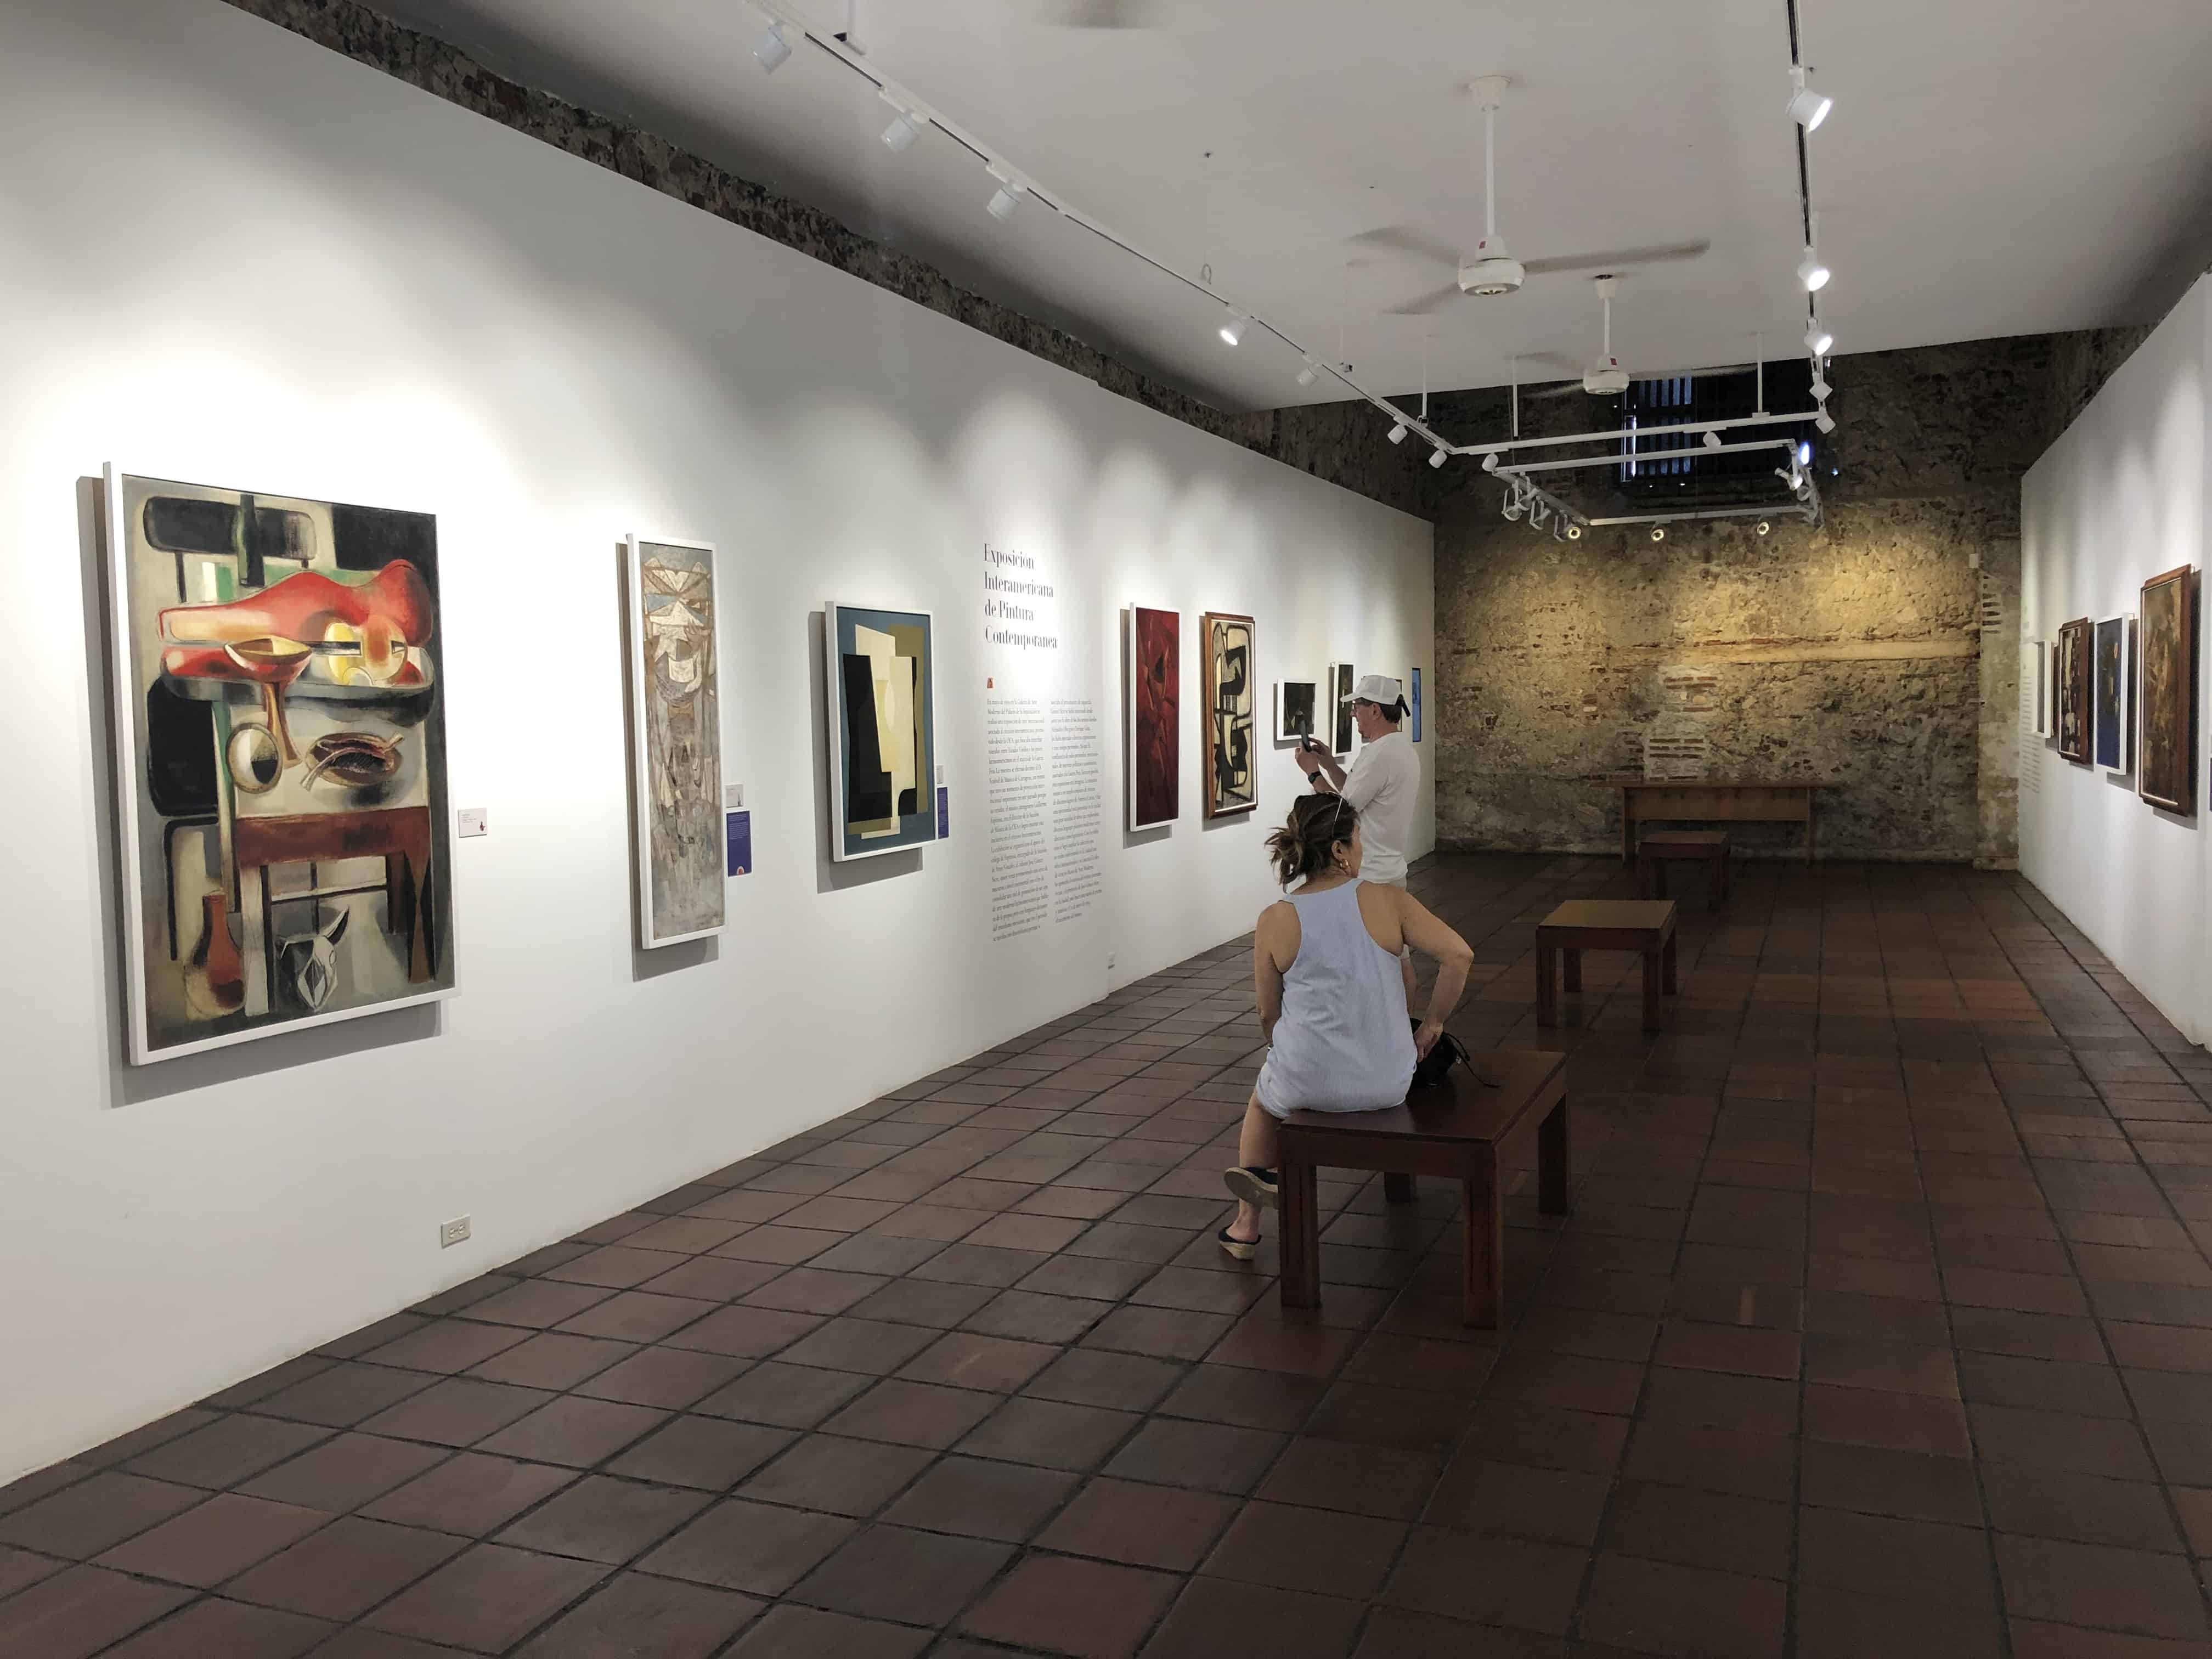 First gallery at the Modern Art Museum of Cartagena, Colombia